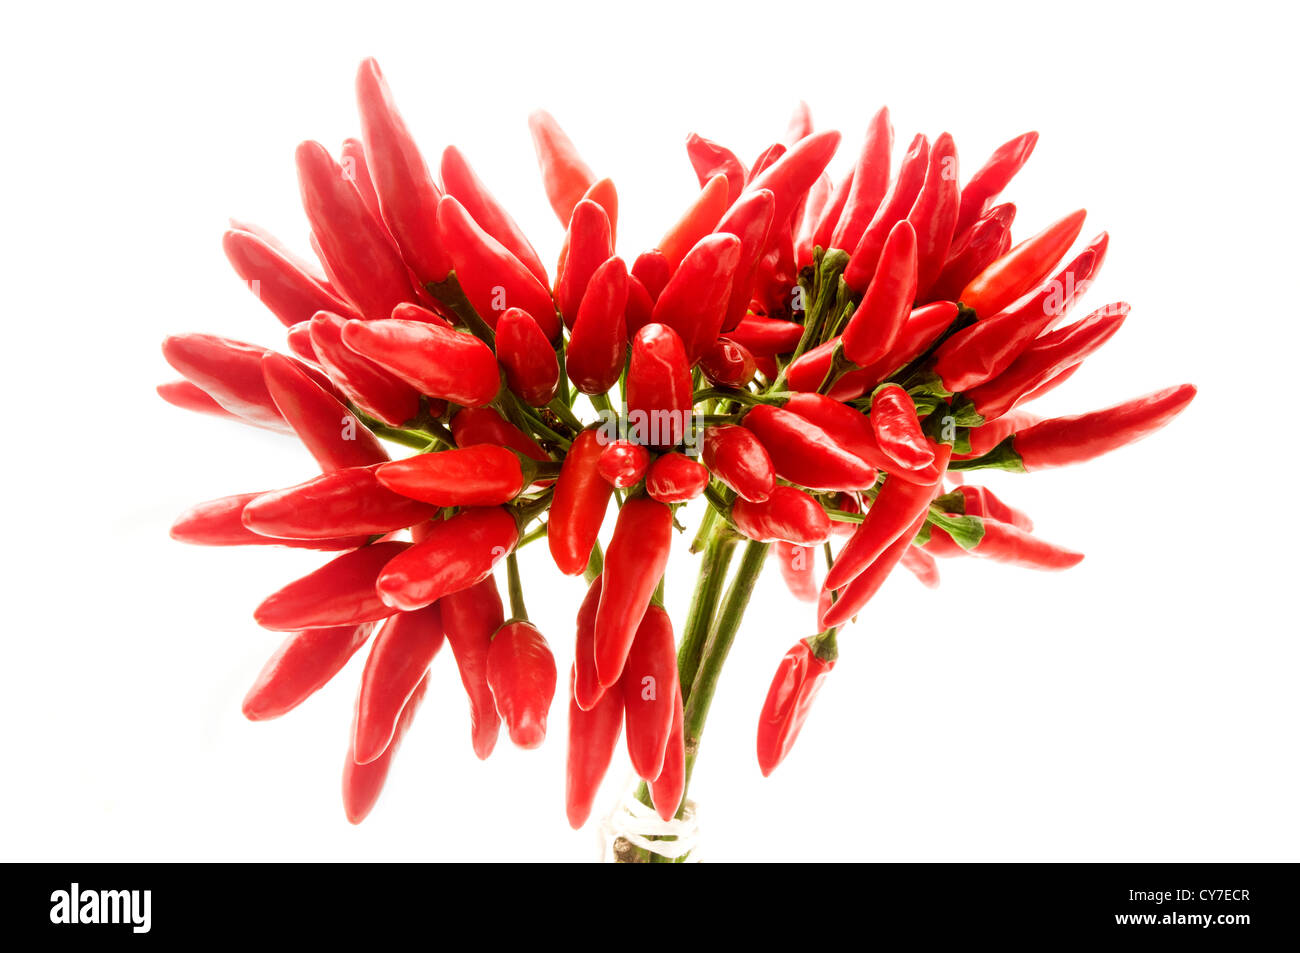 Chili peppers on a white background Stock Photo